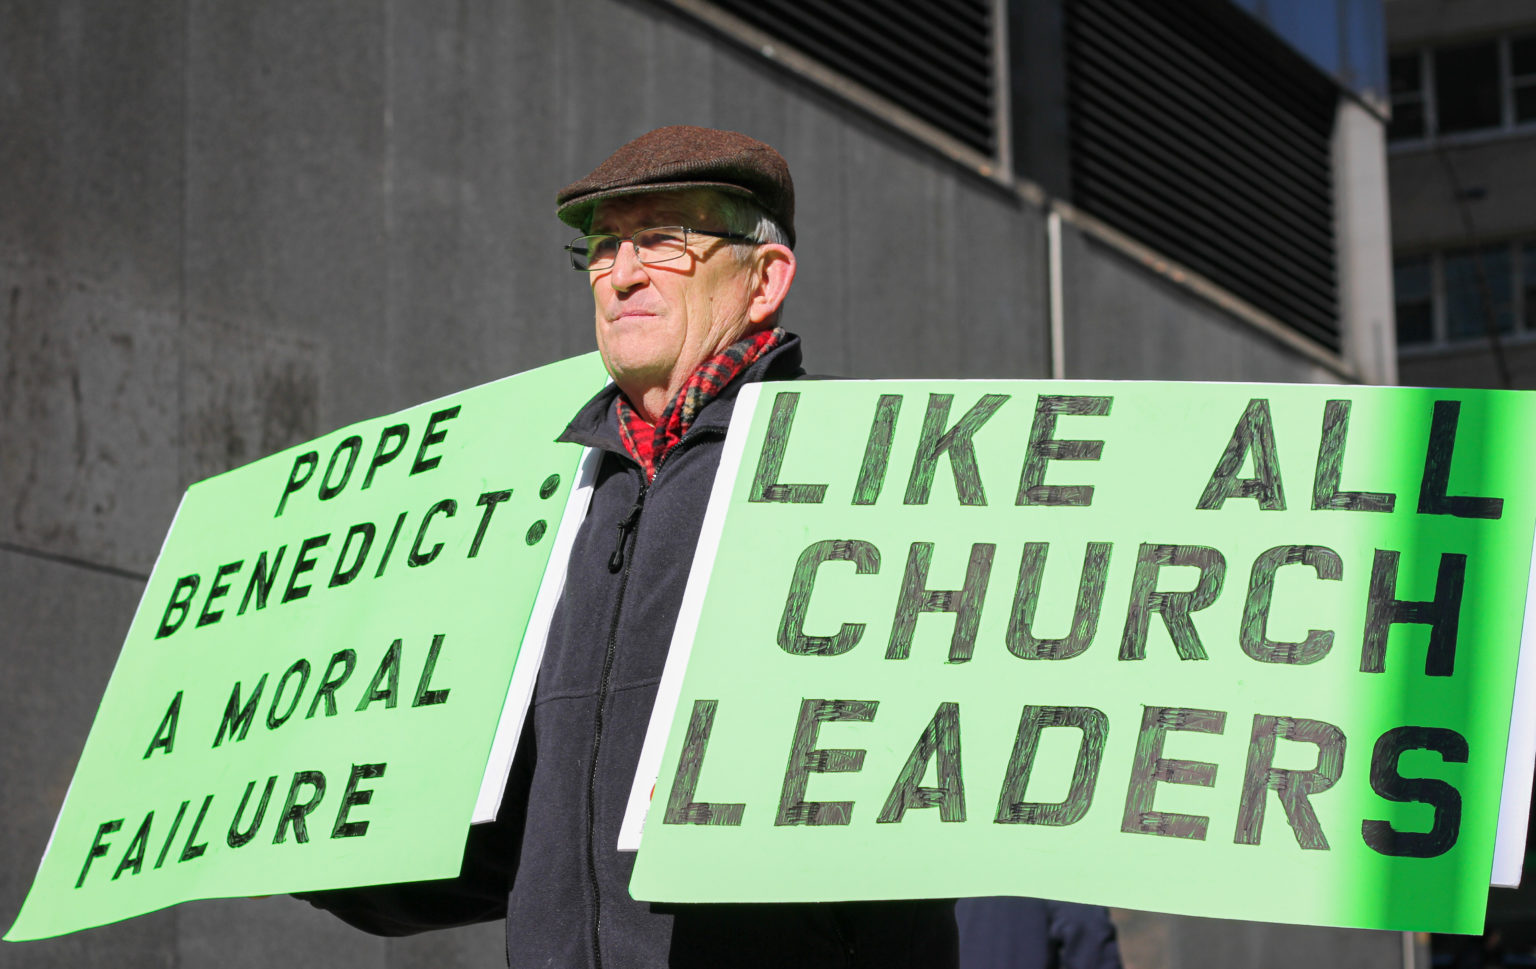 [Photo above: Former clergyman, Robert Hoatson, protests outside the Manhattan business offices of the Archdiocese of New York in support of sexual abuse victims. His goal is to “stir the pot” and put pressure on church leadership to acknowledge predatory behavior. New York, NY. Feb. 9, 2022. Danielle Dawson for NY City Lens]